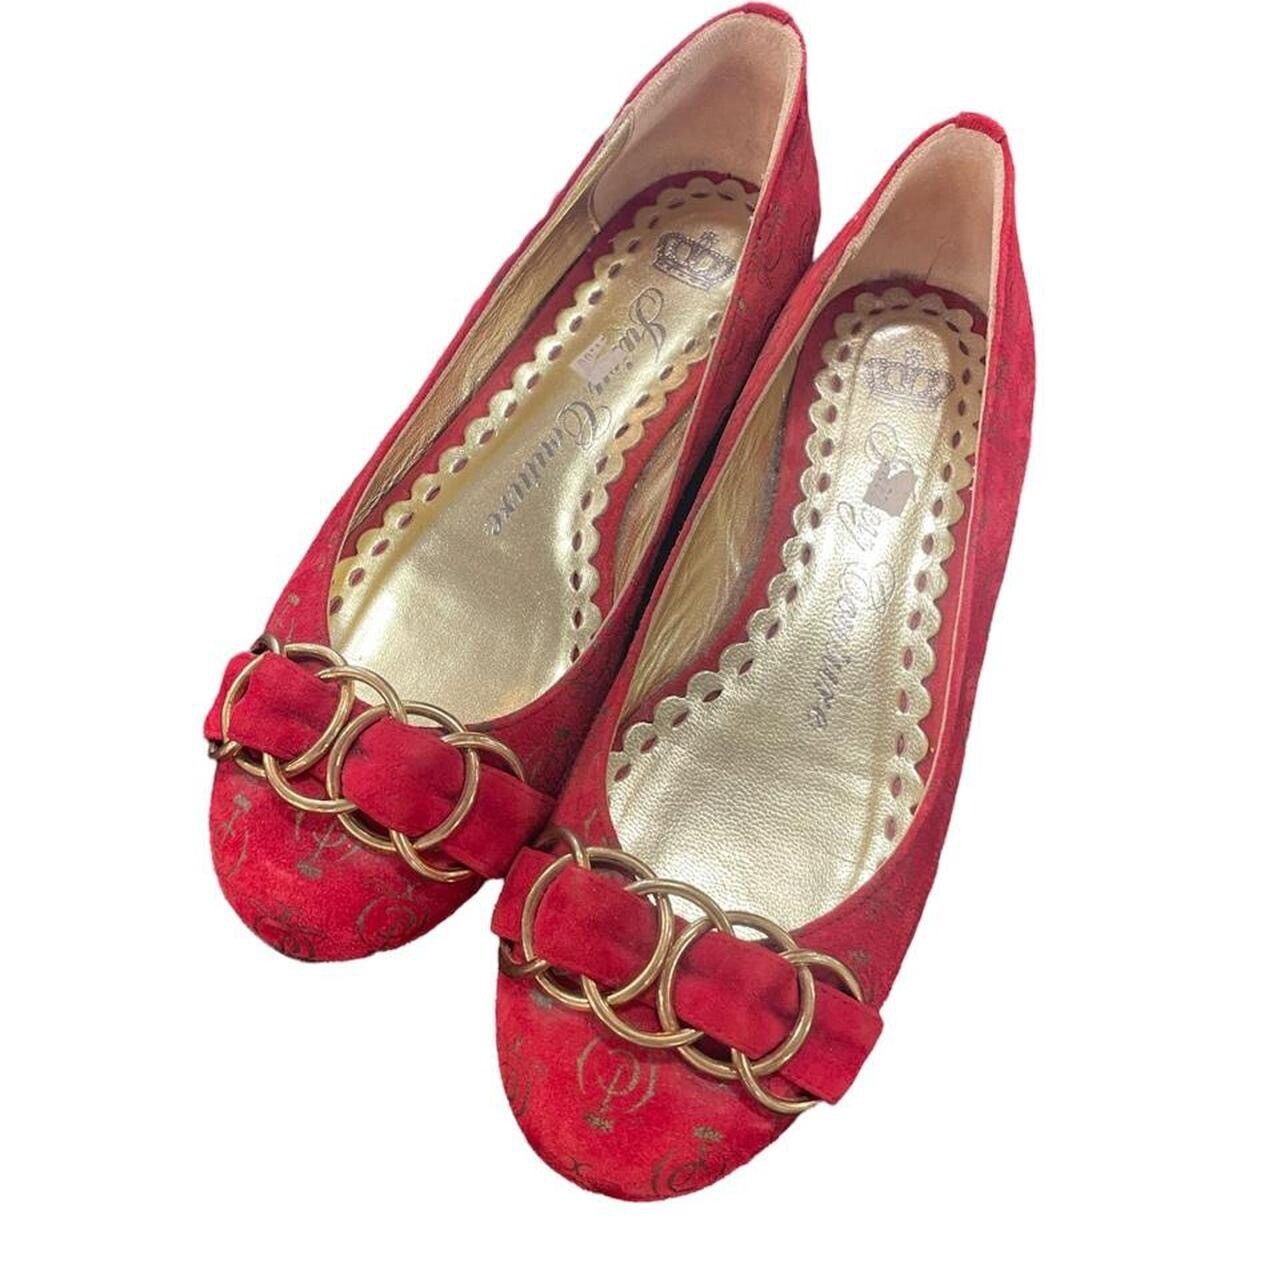 Juicy Couture Juicy Couture Red Velour Ballet Flats | Grailed